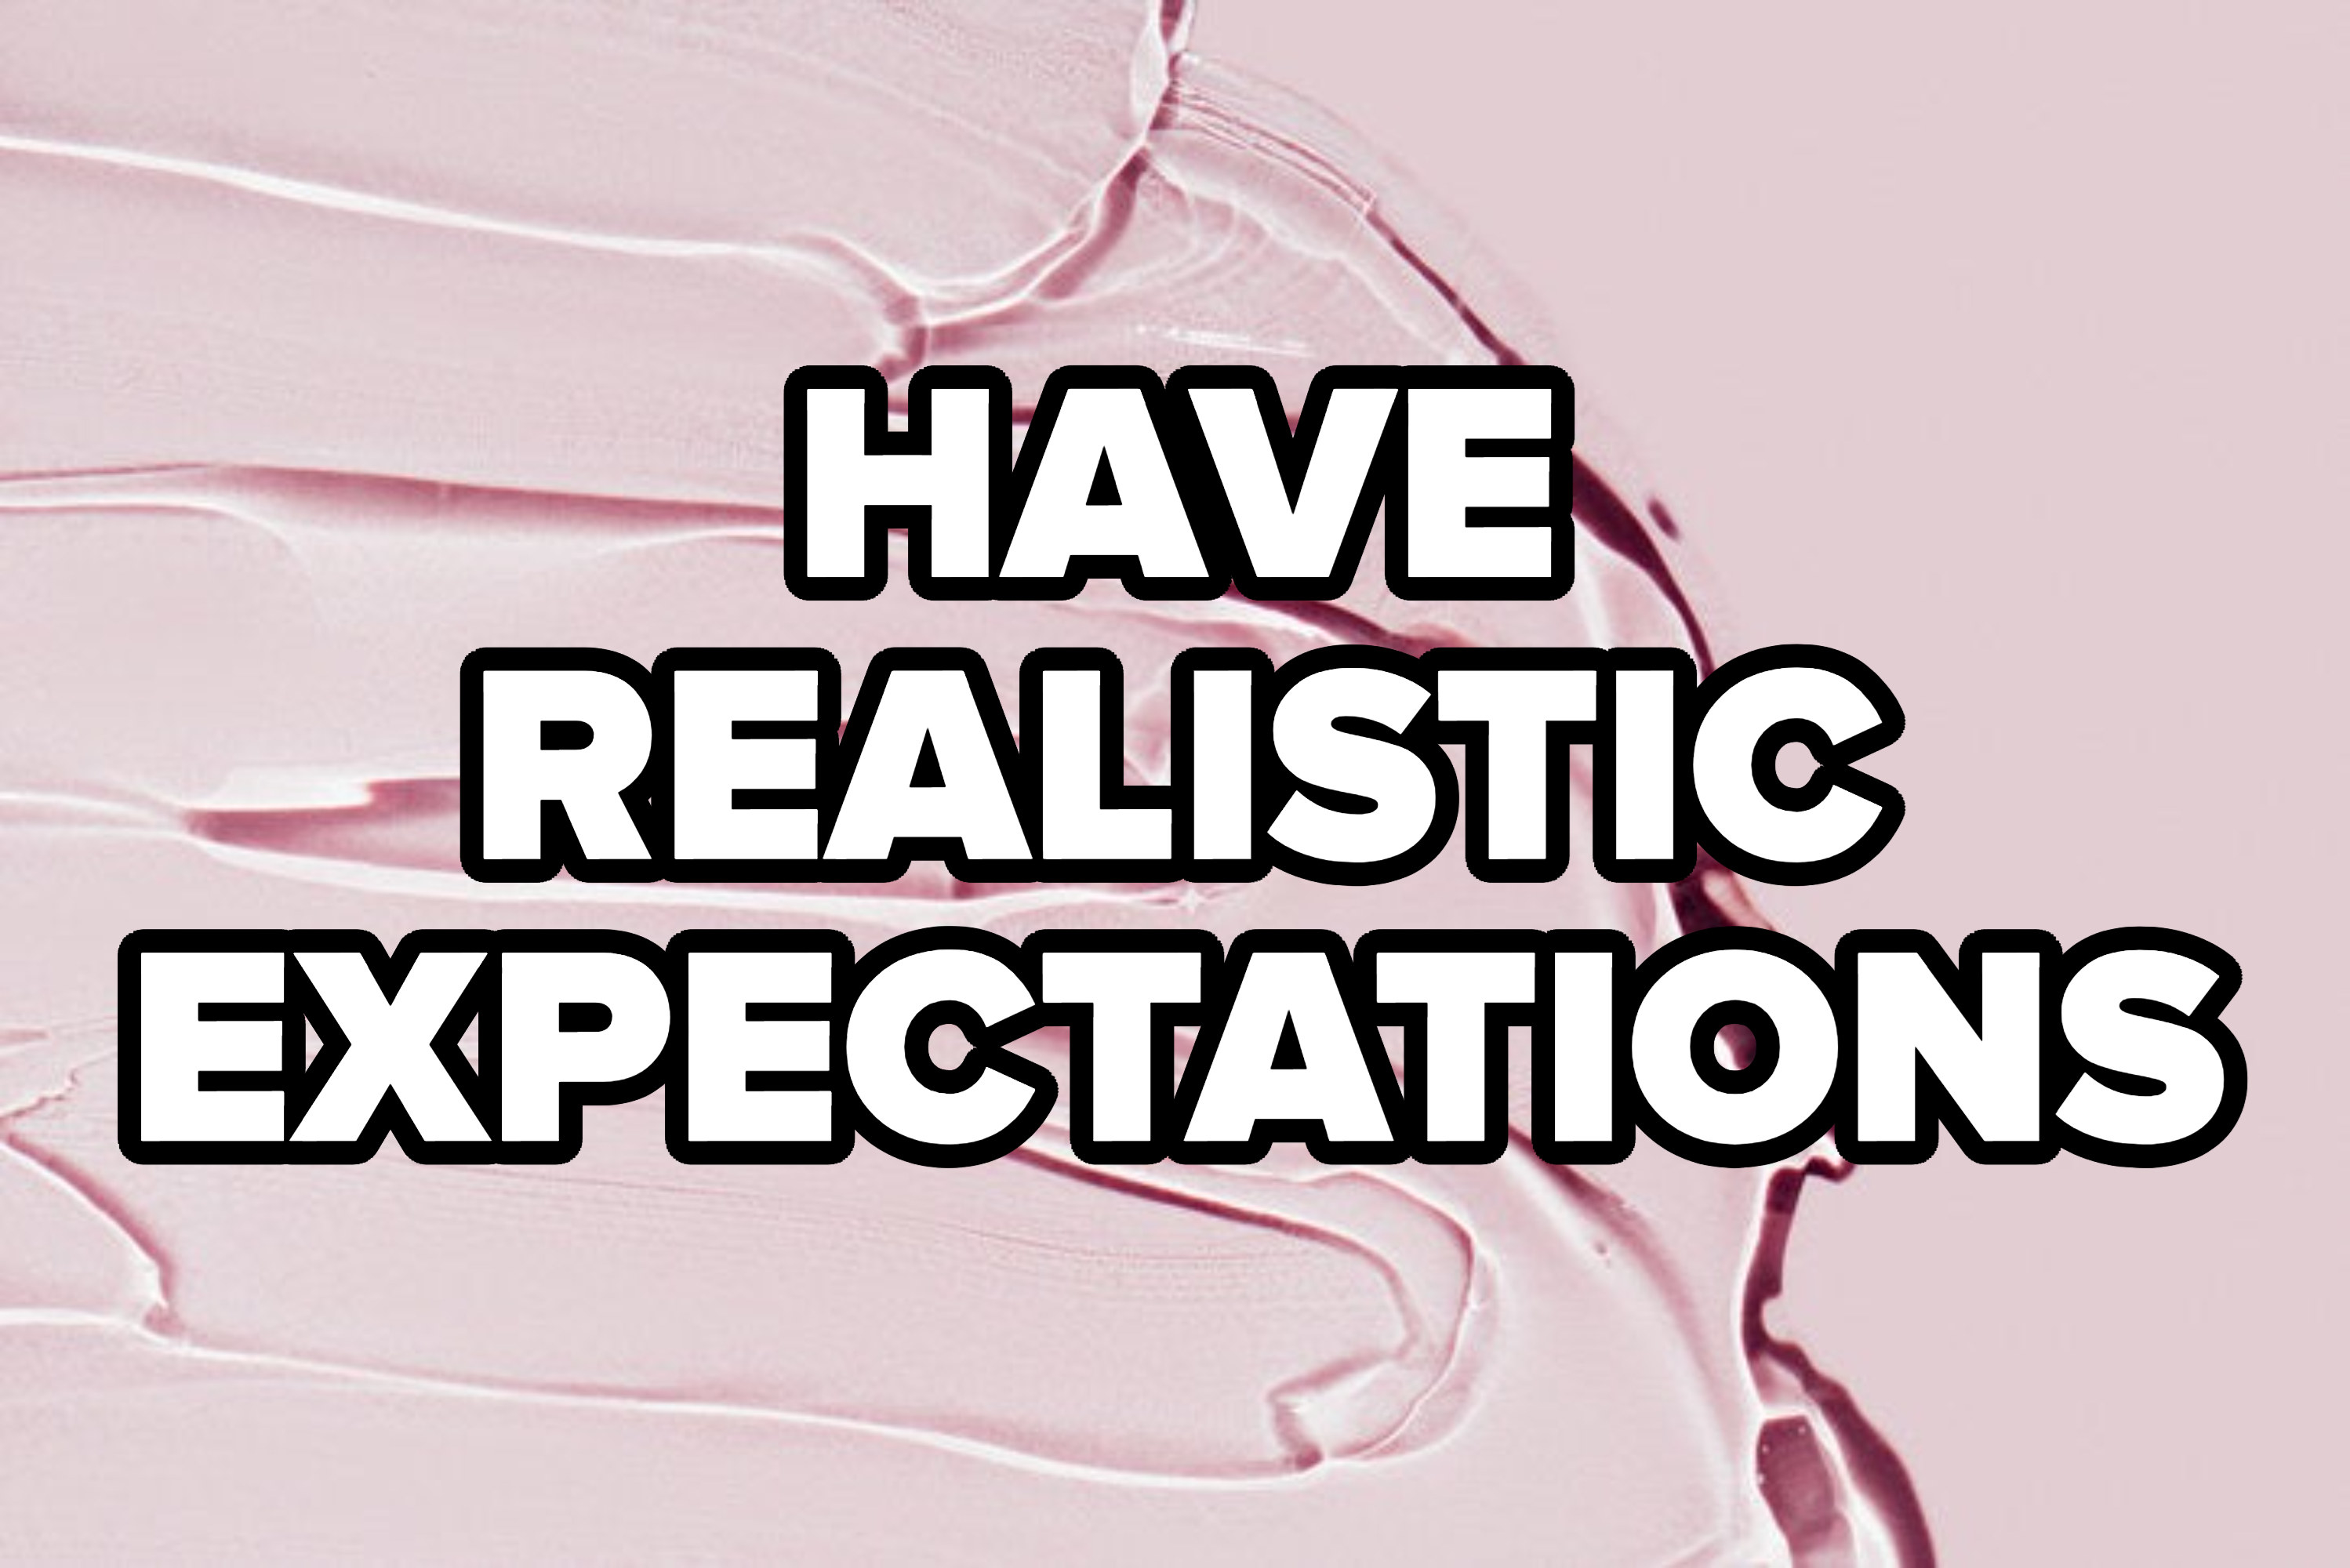 &quot;HAVE REALISTIC EXPECTATIONS&quot;